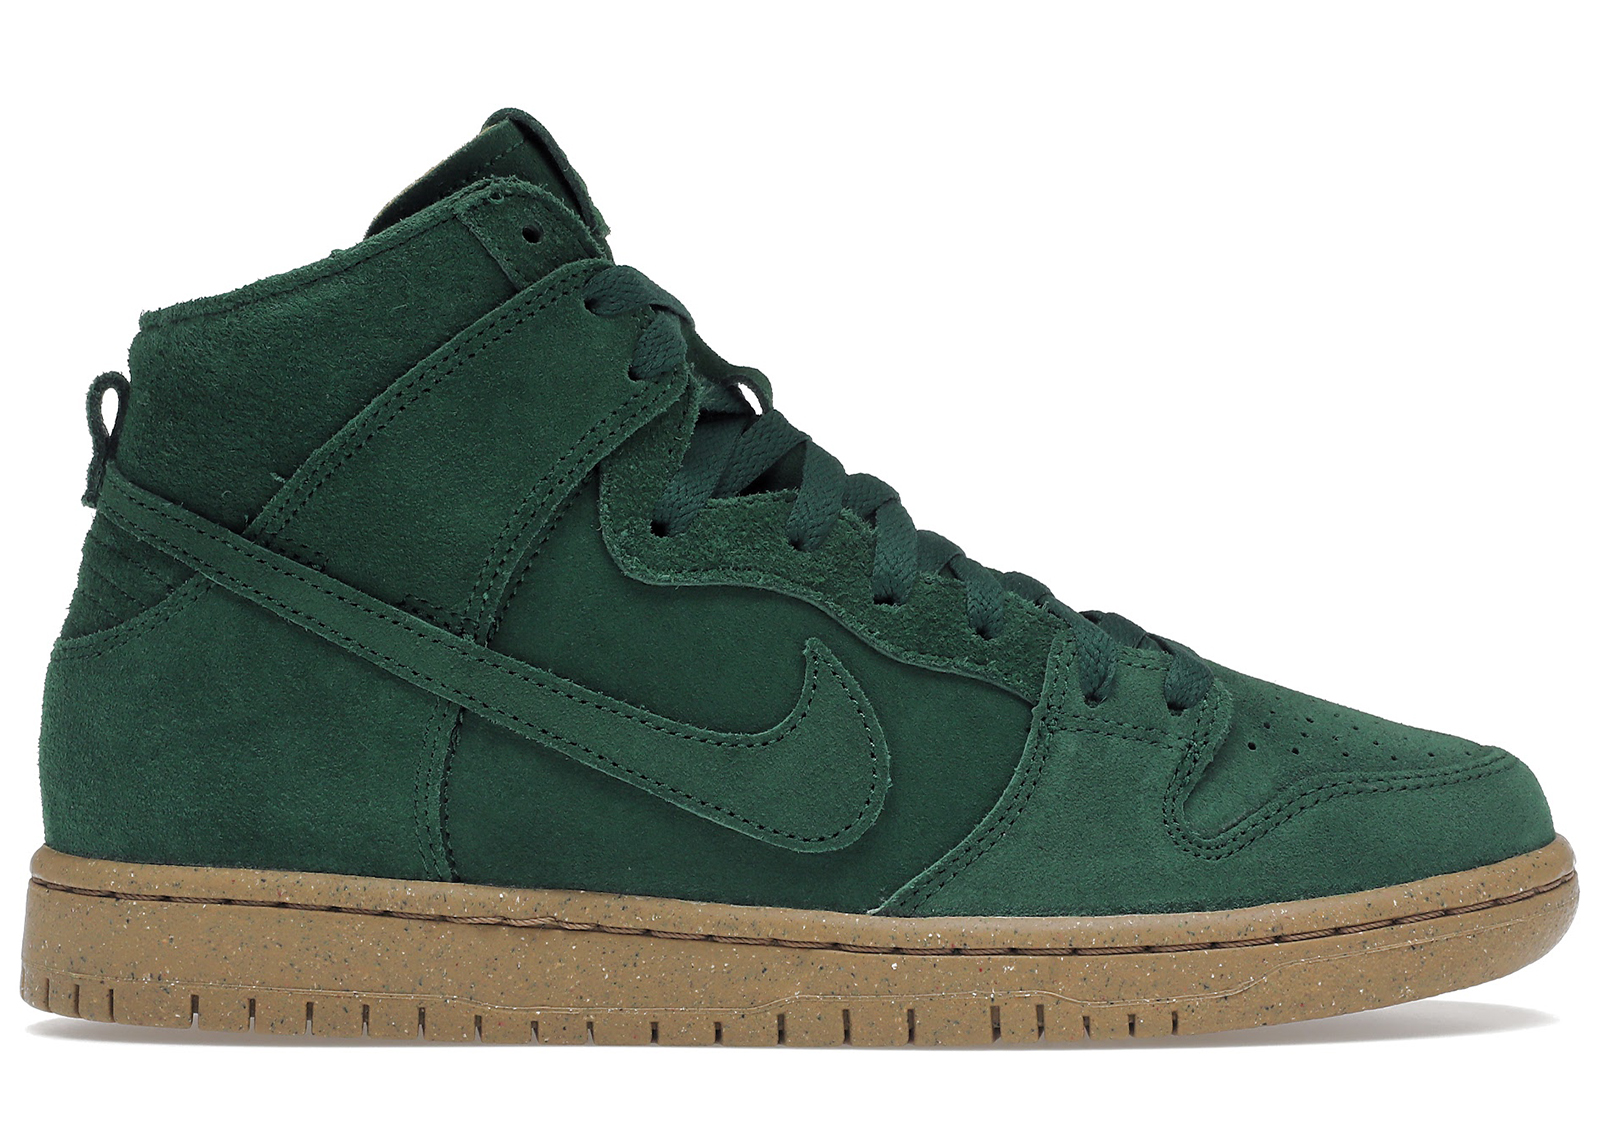 brown and green dunks